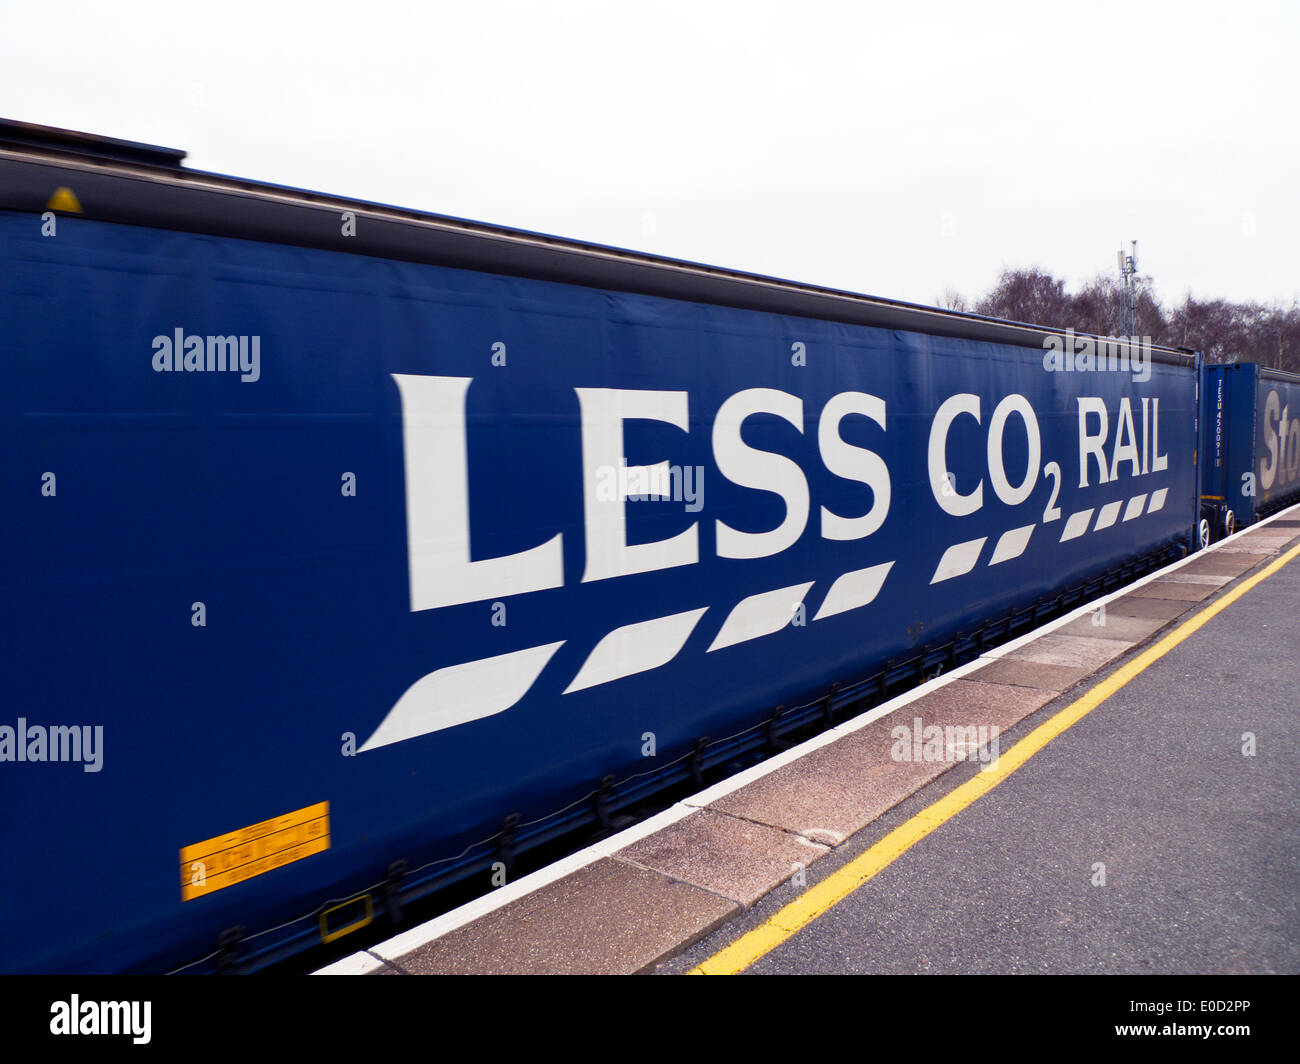 Tesco supermarket 'Less CO2 Rail' environmental advert sign on side of goods train rail freight container in Gloucestershire England UK KATHY DEWITT Stock Photo